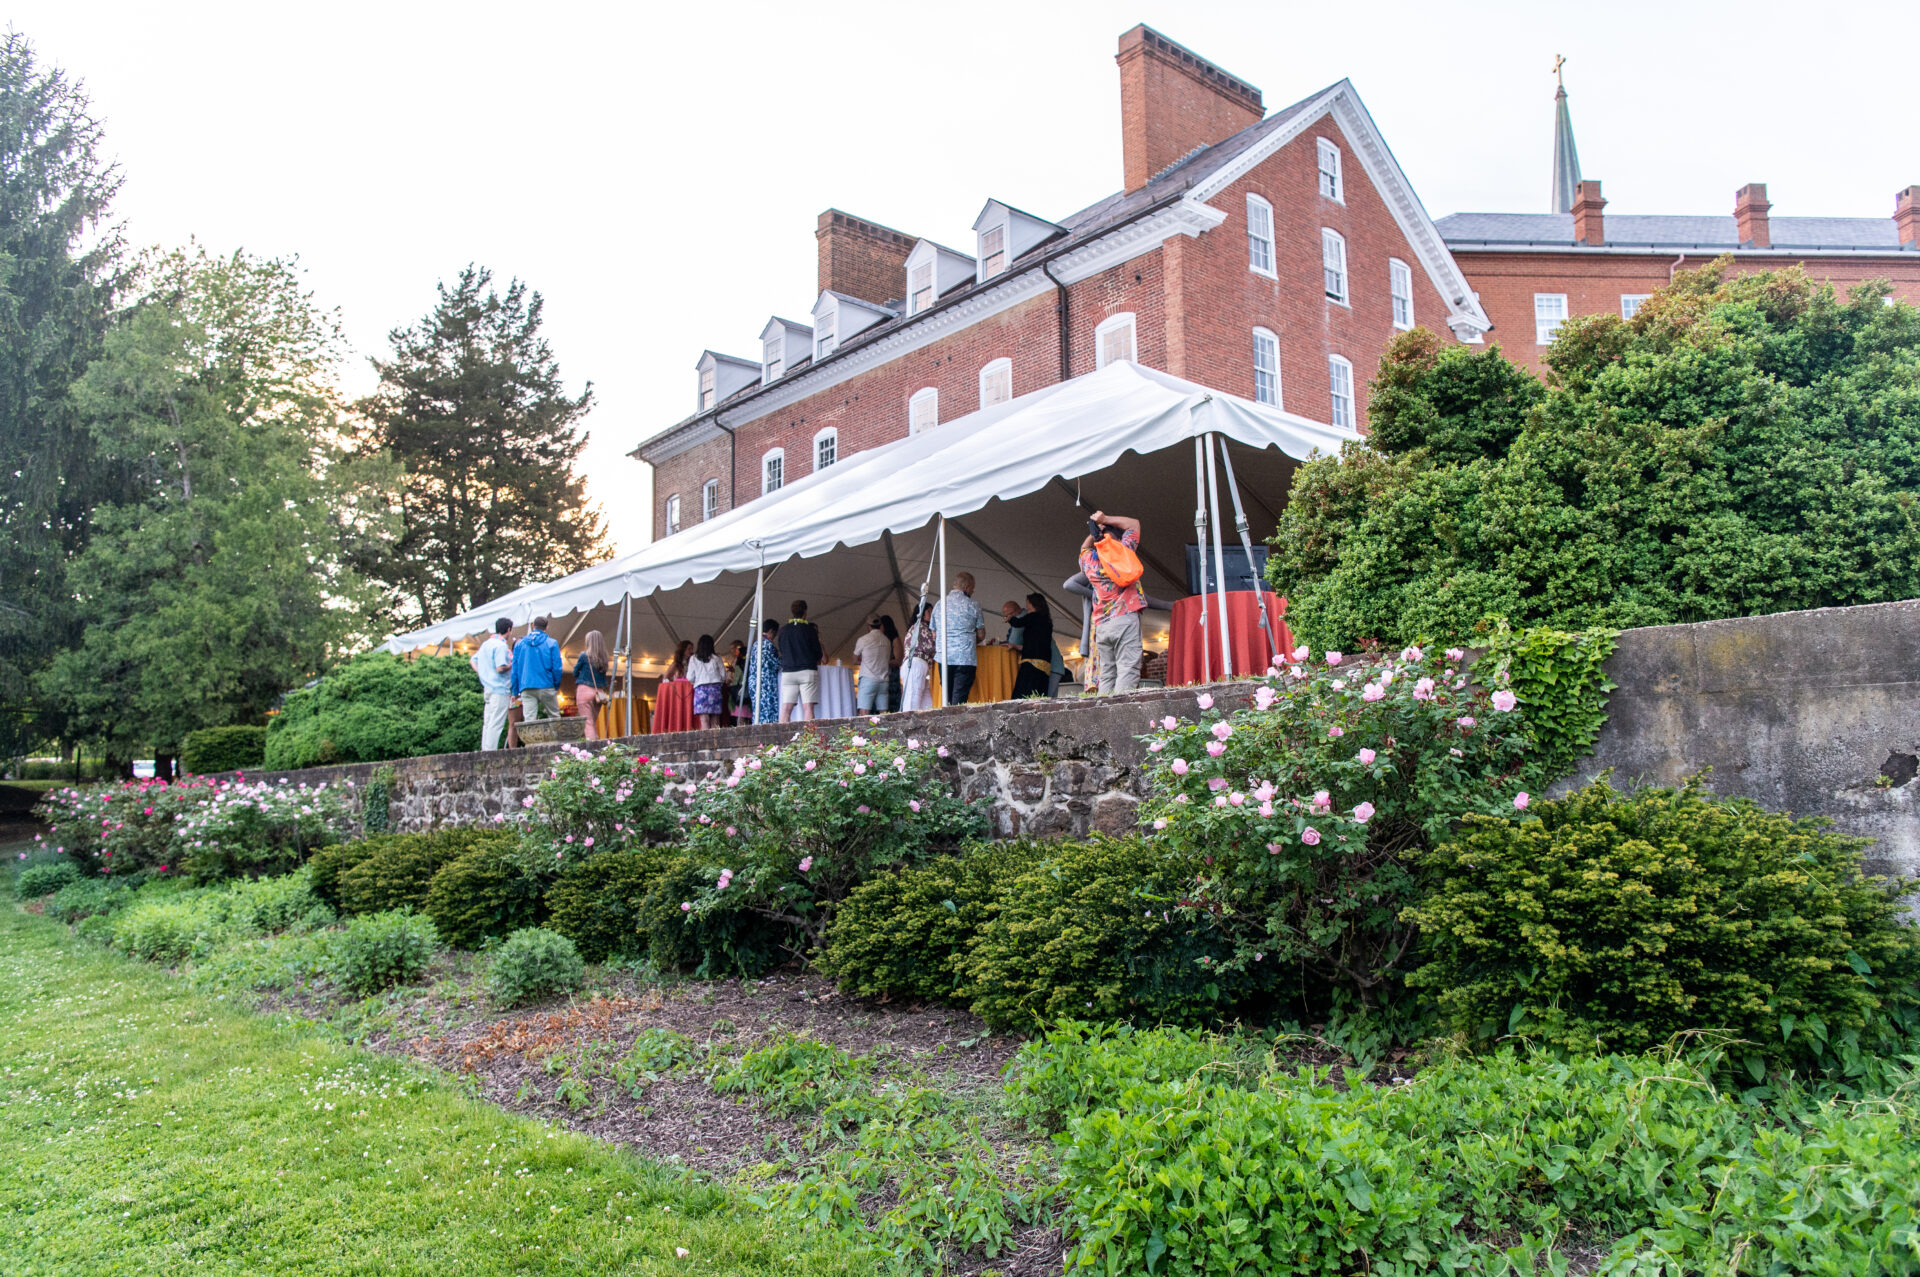 A view of the Charles Carroll House from the garden. A white tent is visible with attendees of the second annual live water luau underneath of it.